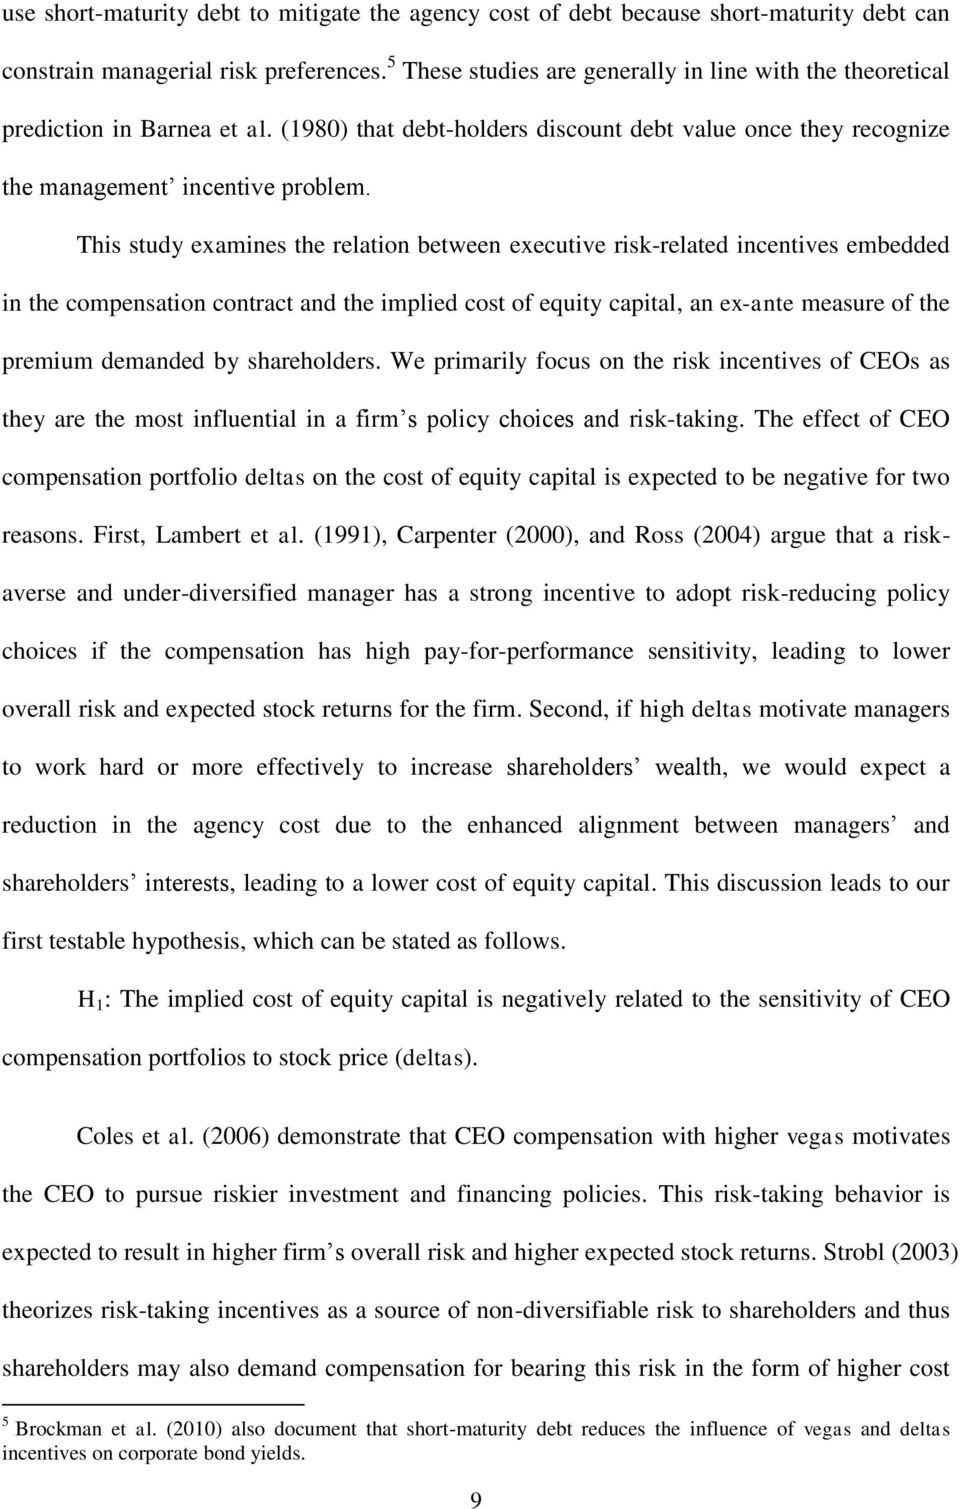 This study examines the relation between executive risk-related incentives embedded in the compensation contract and the implied cost of equity capital, an ex-ante measure of the premium demanded by